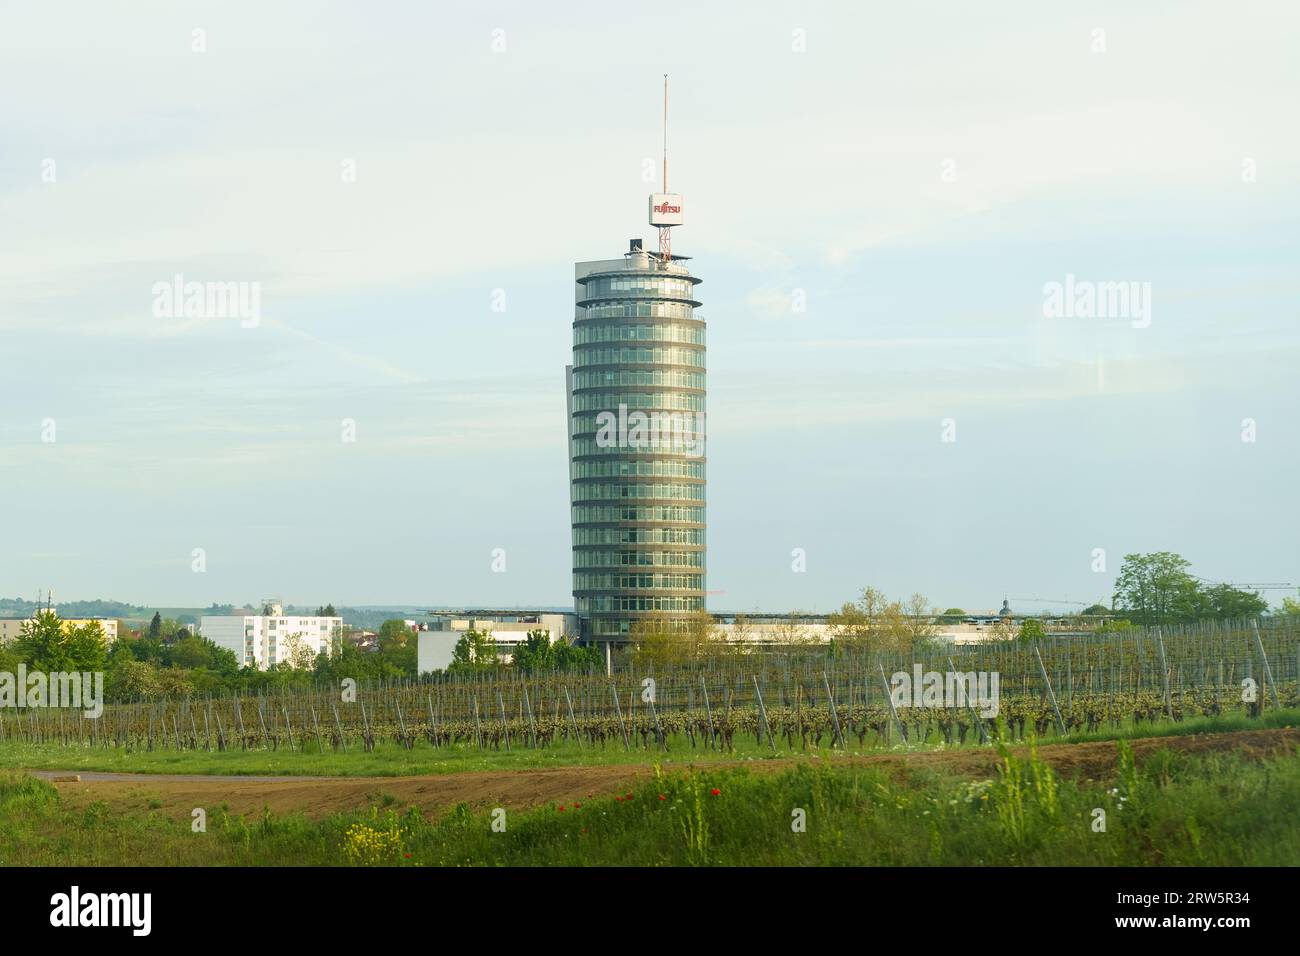 Neckarsulm, Germany - May 7, 2023: View of the Fujitsu Services GmbH building. Stock Photo